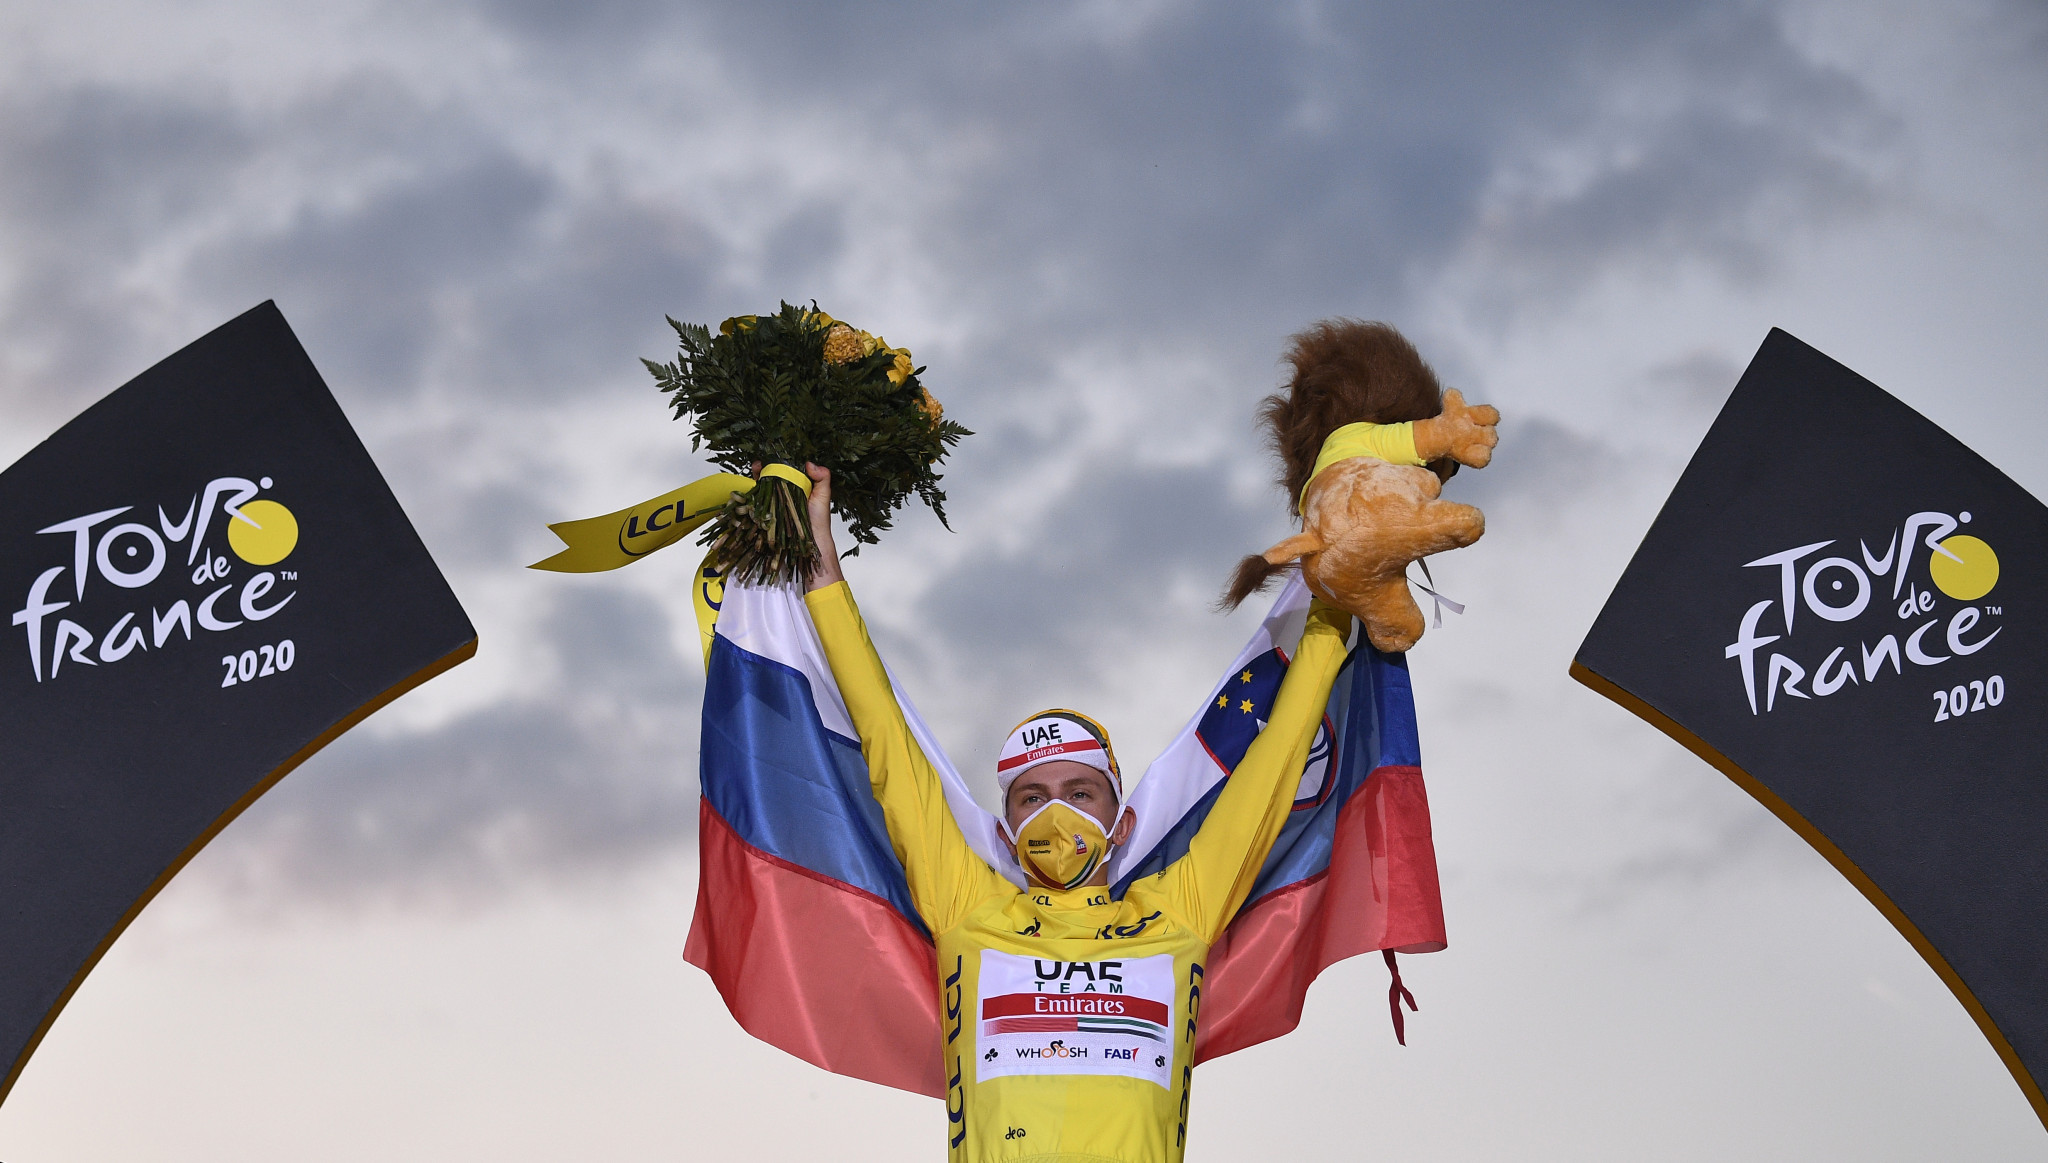 Tadej Pogačar was this year's winner in the yellow jersey ©Getty Images